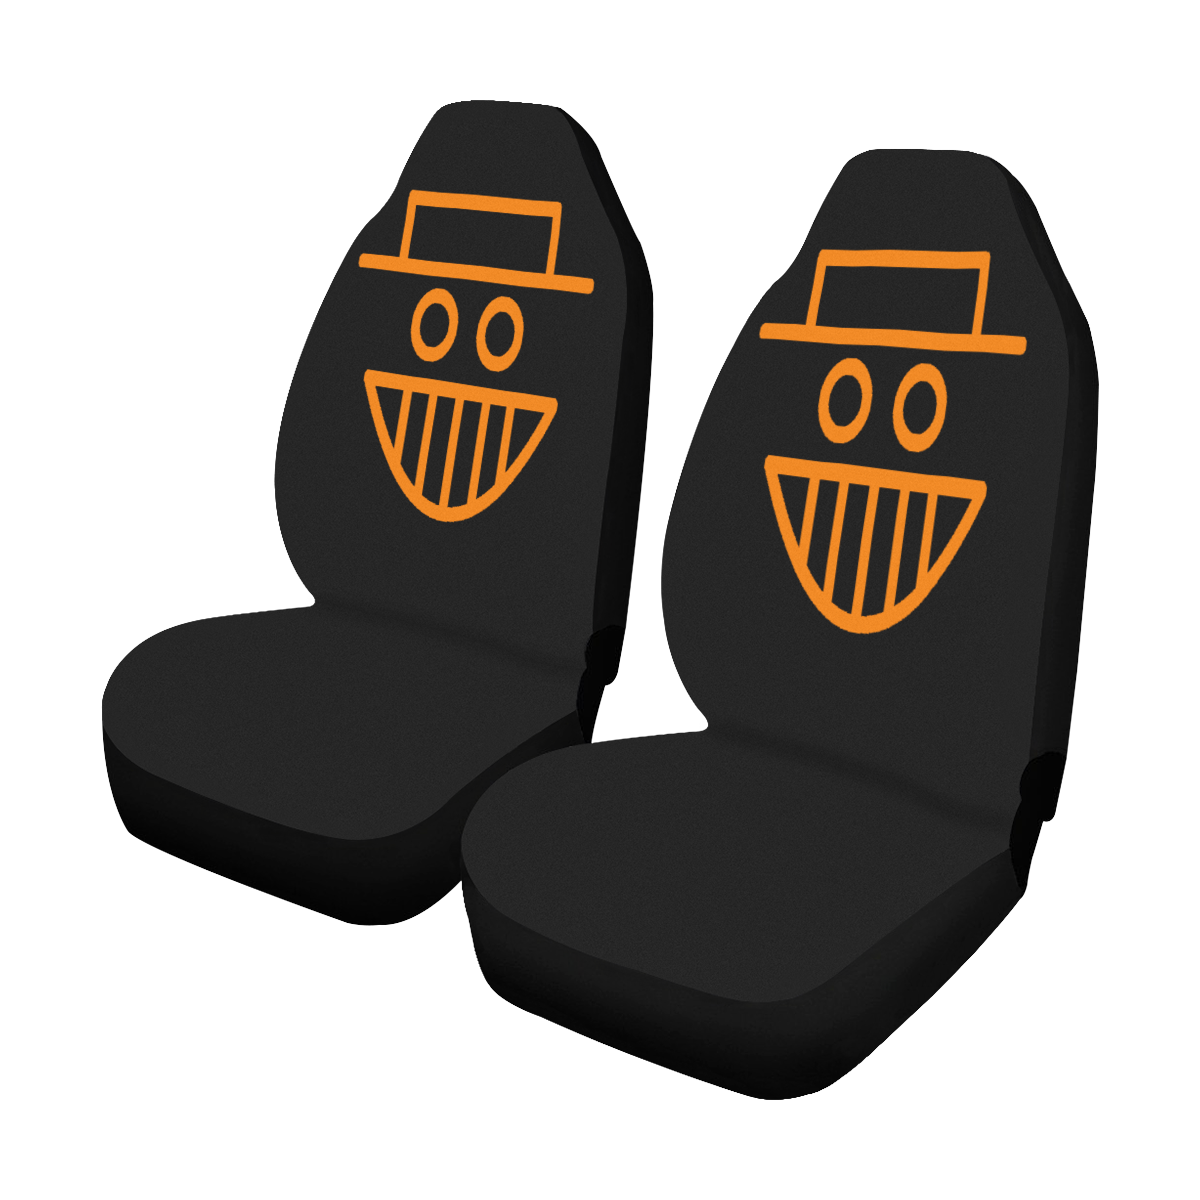 Etsy-Inq Car Seat Covers (Set of 2)